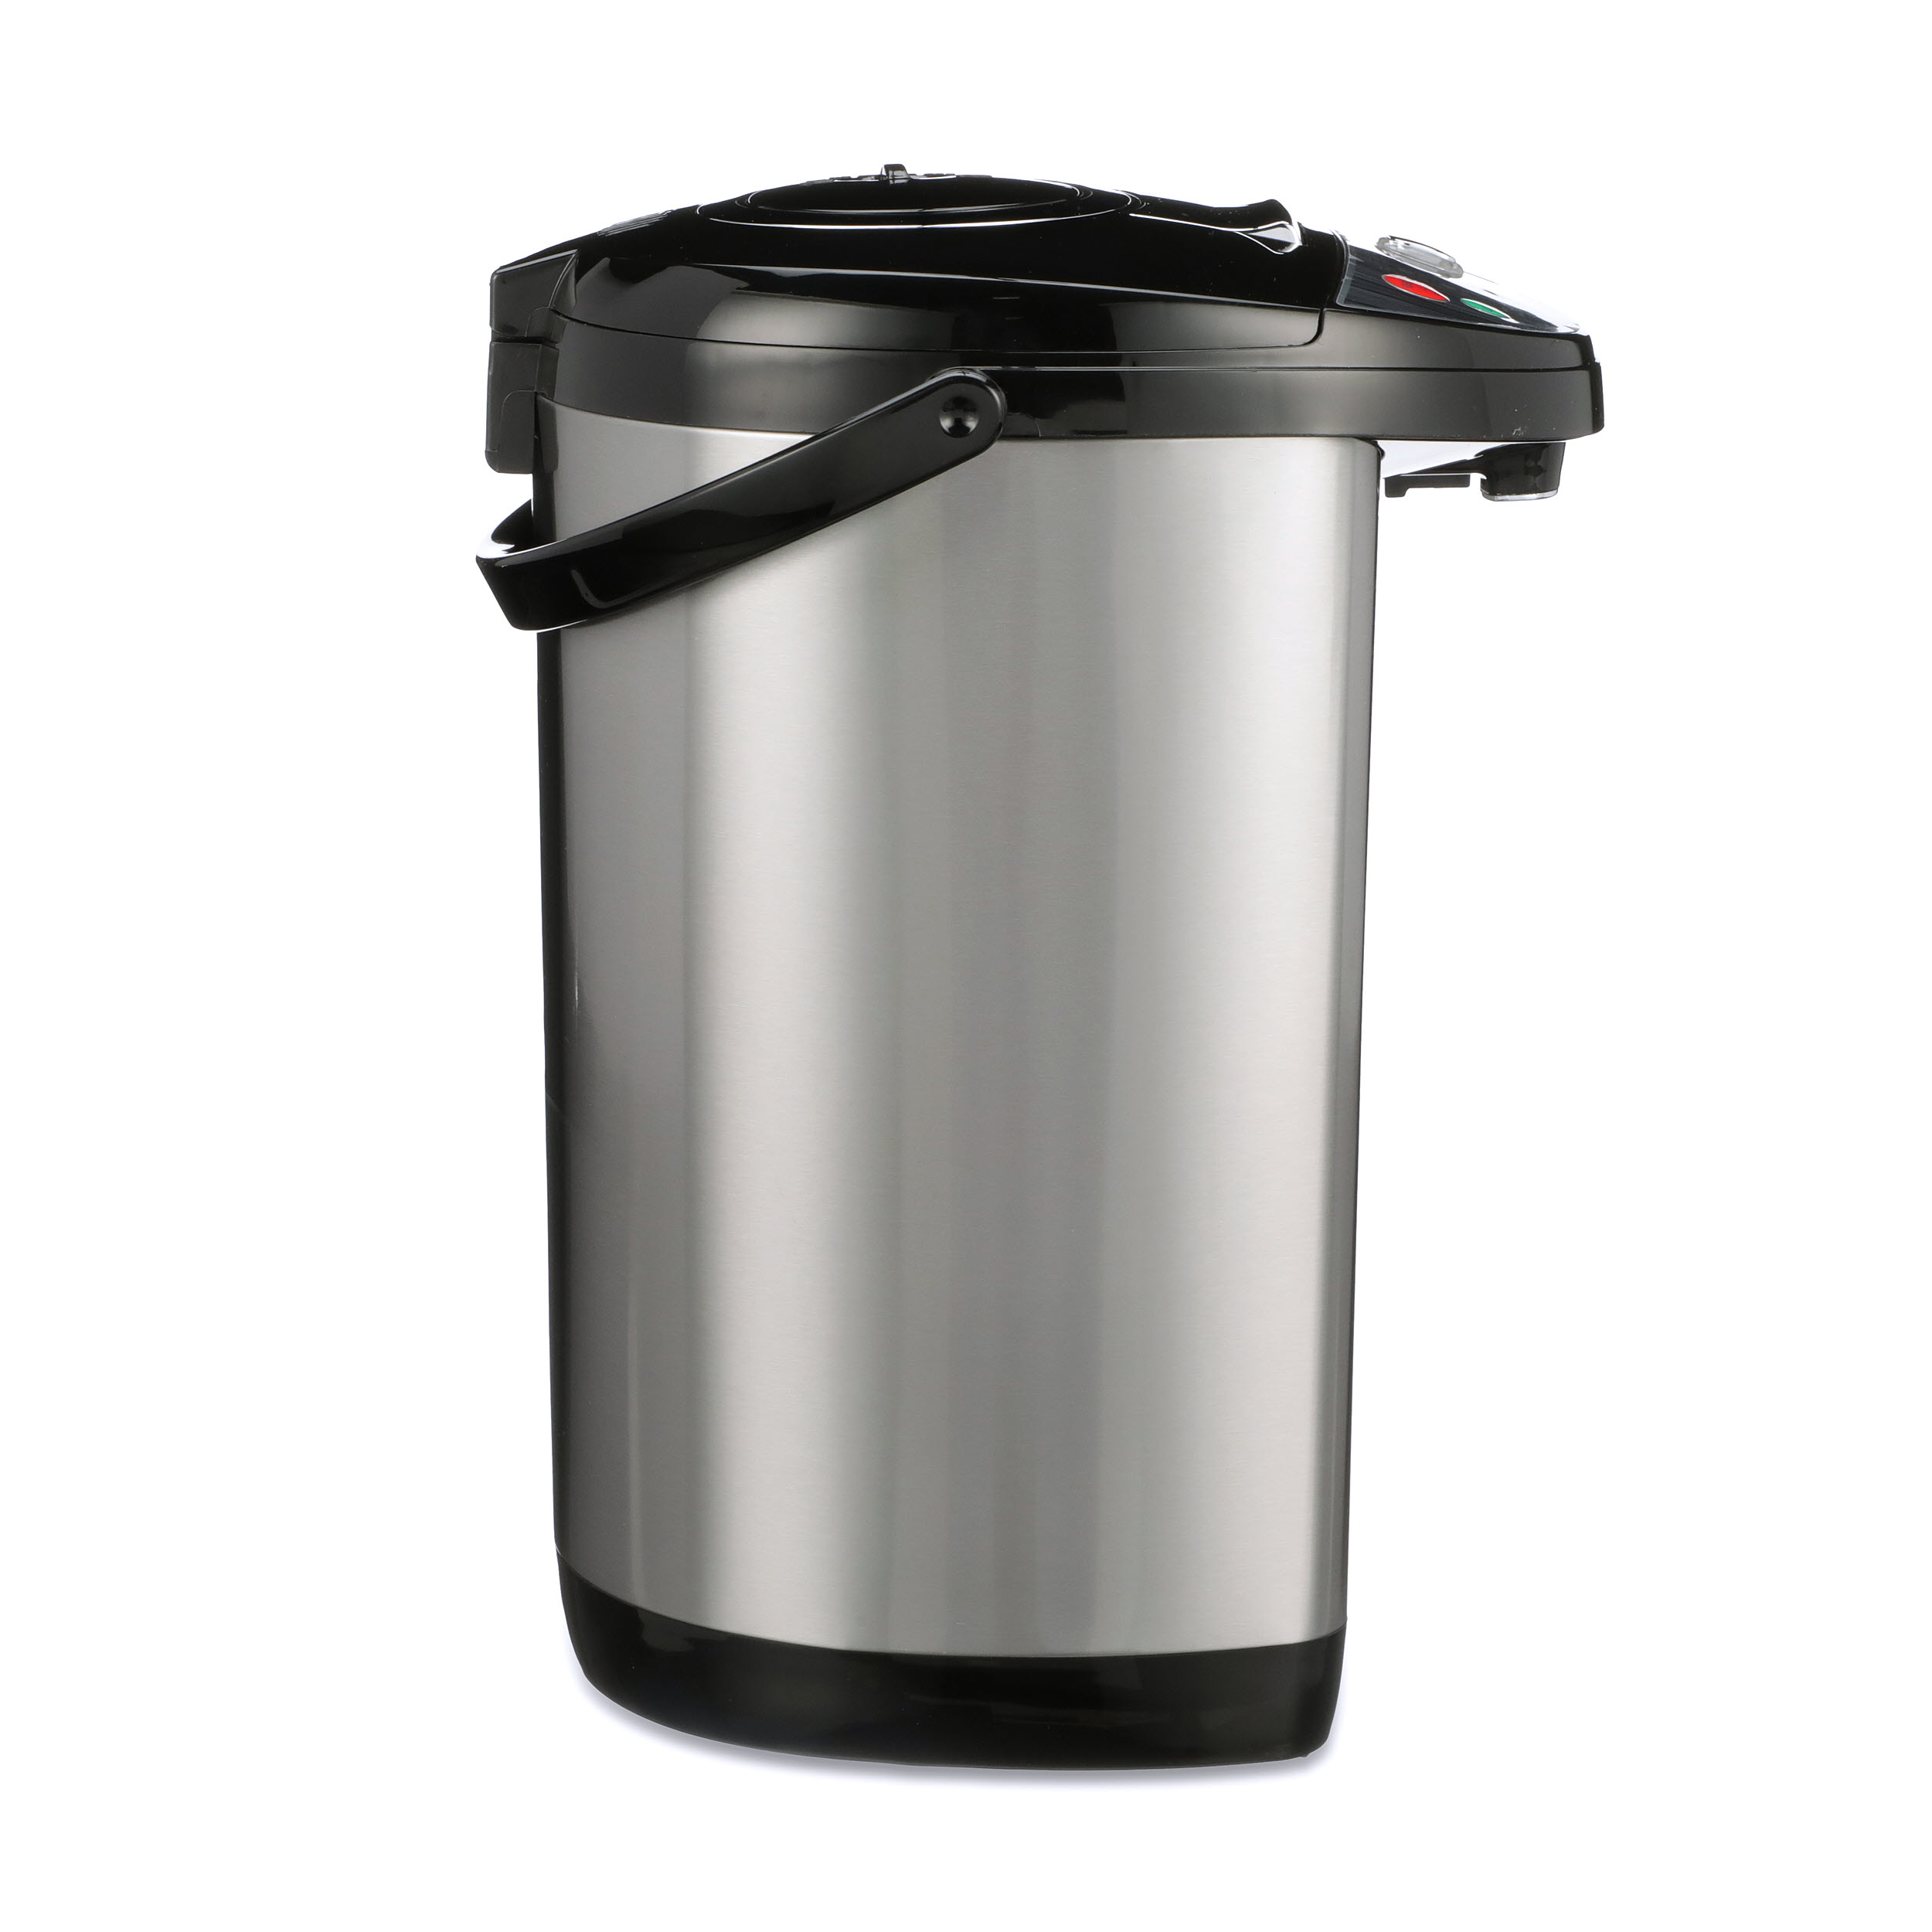 Chefman Stainless Steel Electric Hot Water Pot with Safety Lock, 5.3 L -  Fry's Food Stores